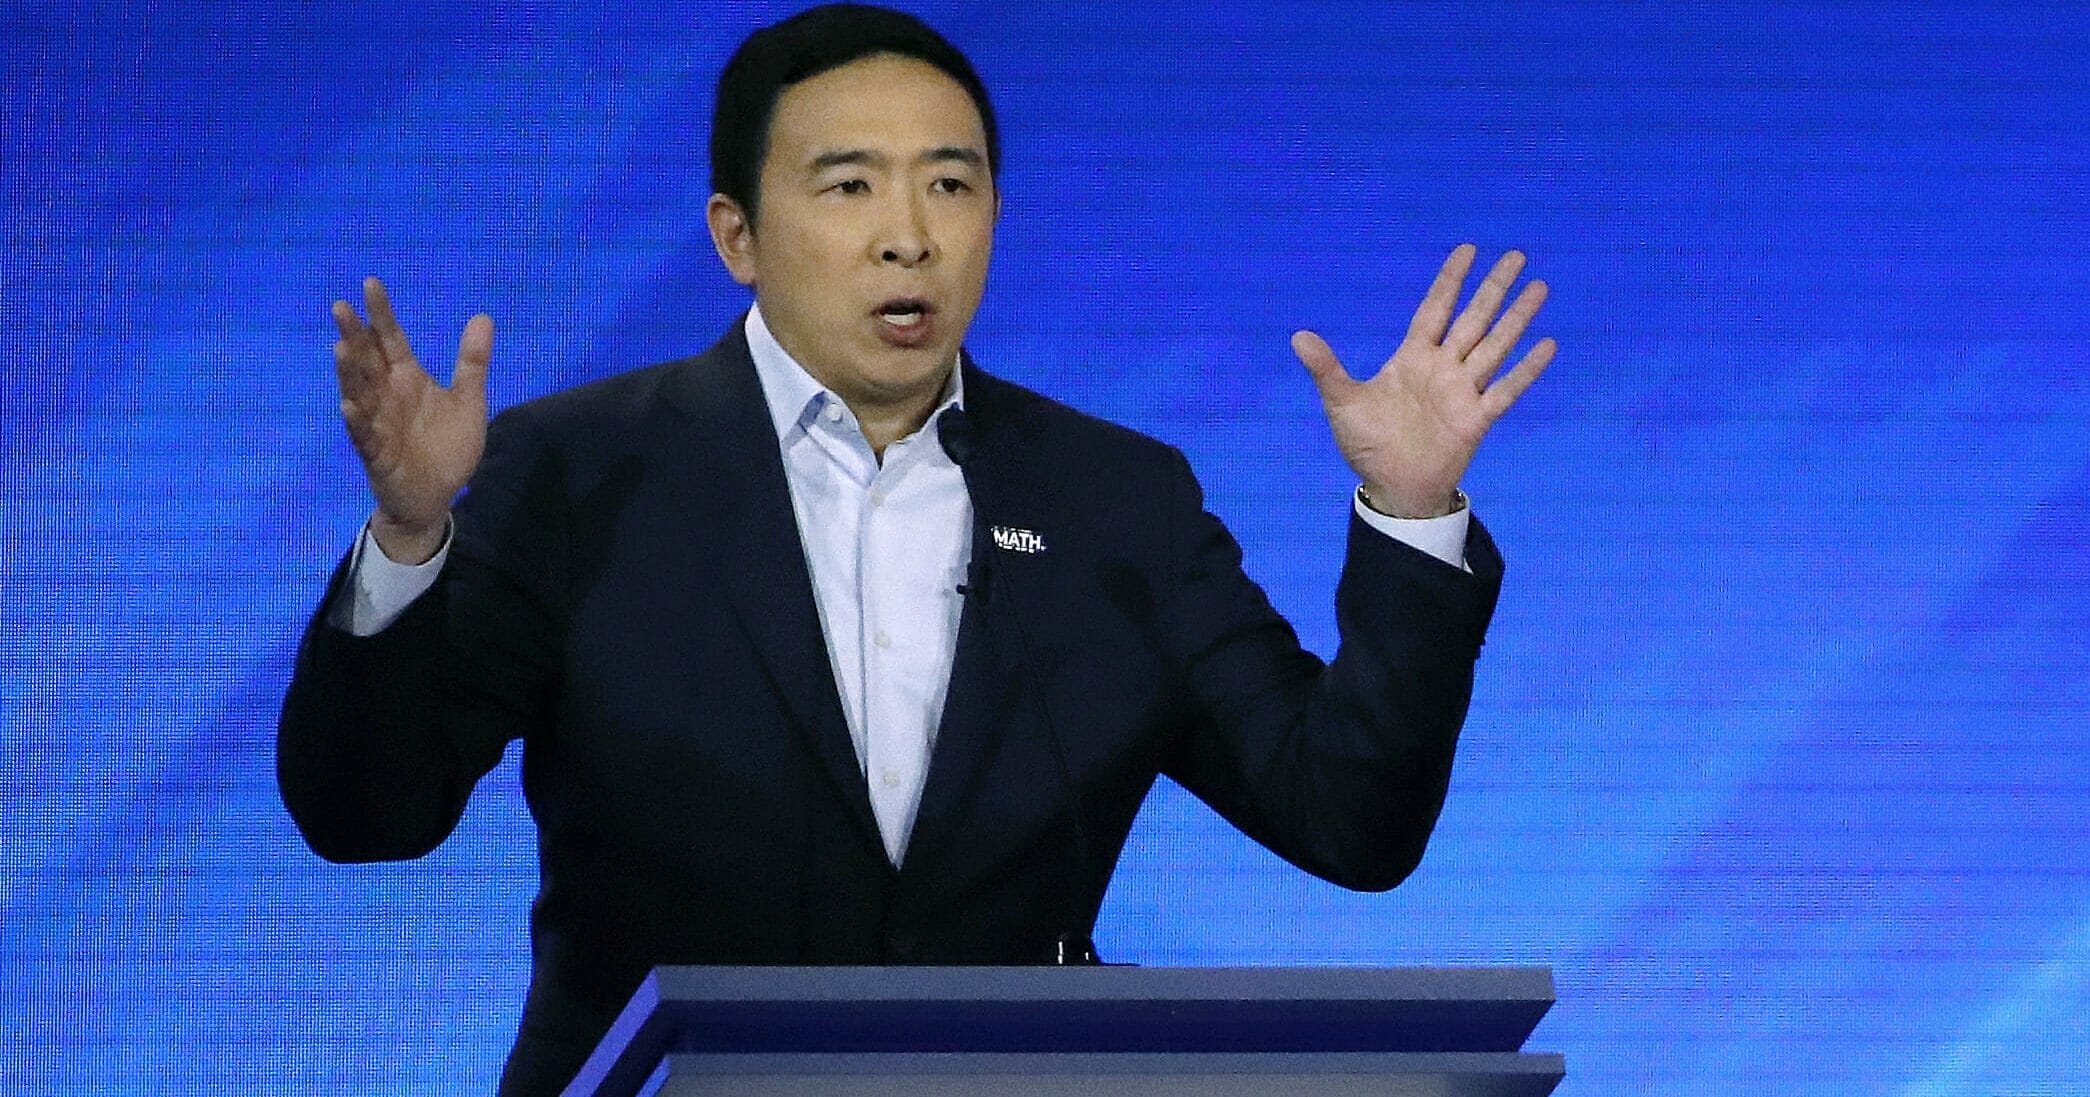 In this Feb. 7, 2020, photo, Democratic presidential candidate entrepreneur Andrew Yang speaks during a Democratic presidential primary debate at Saint Anselm College in Manchester, New Hampshire.